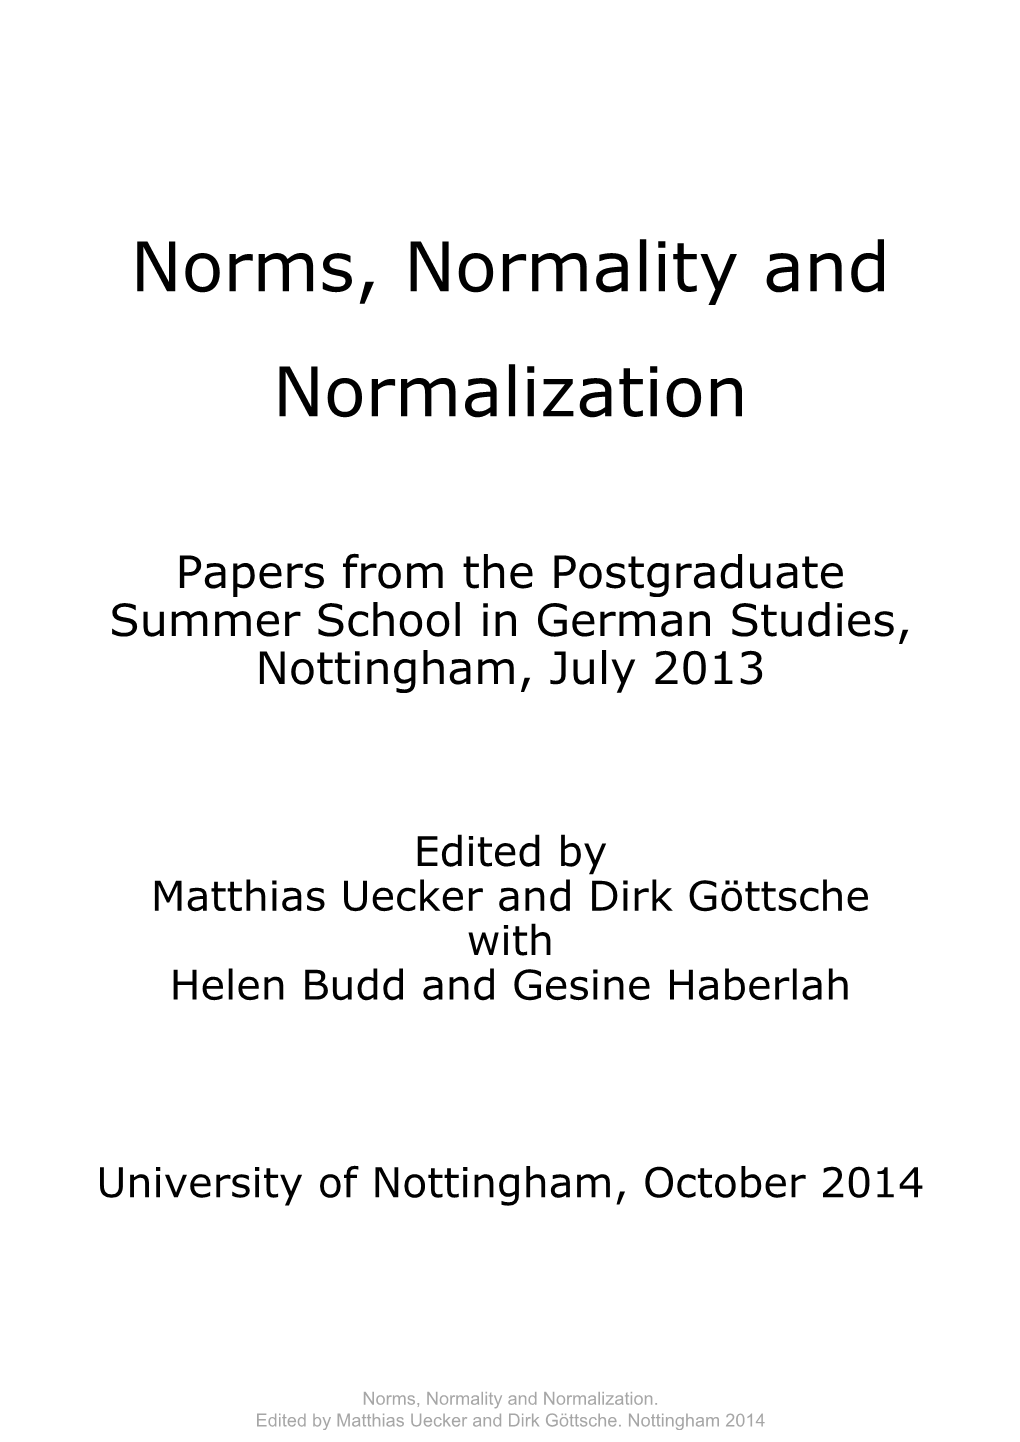 Norms, Normality and Normalization